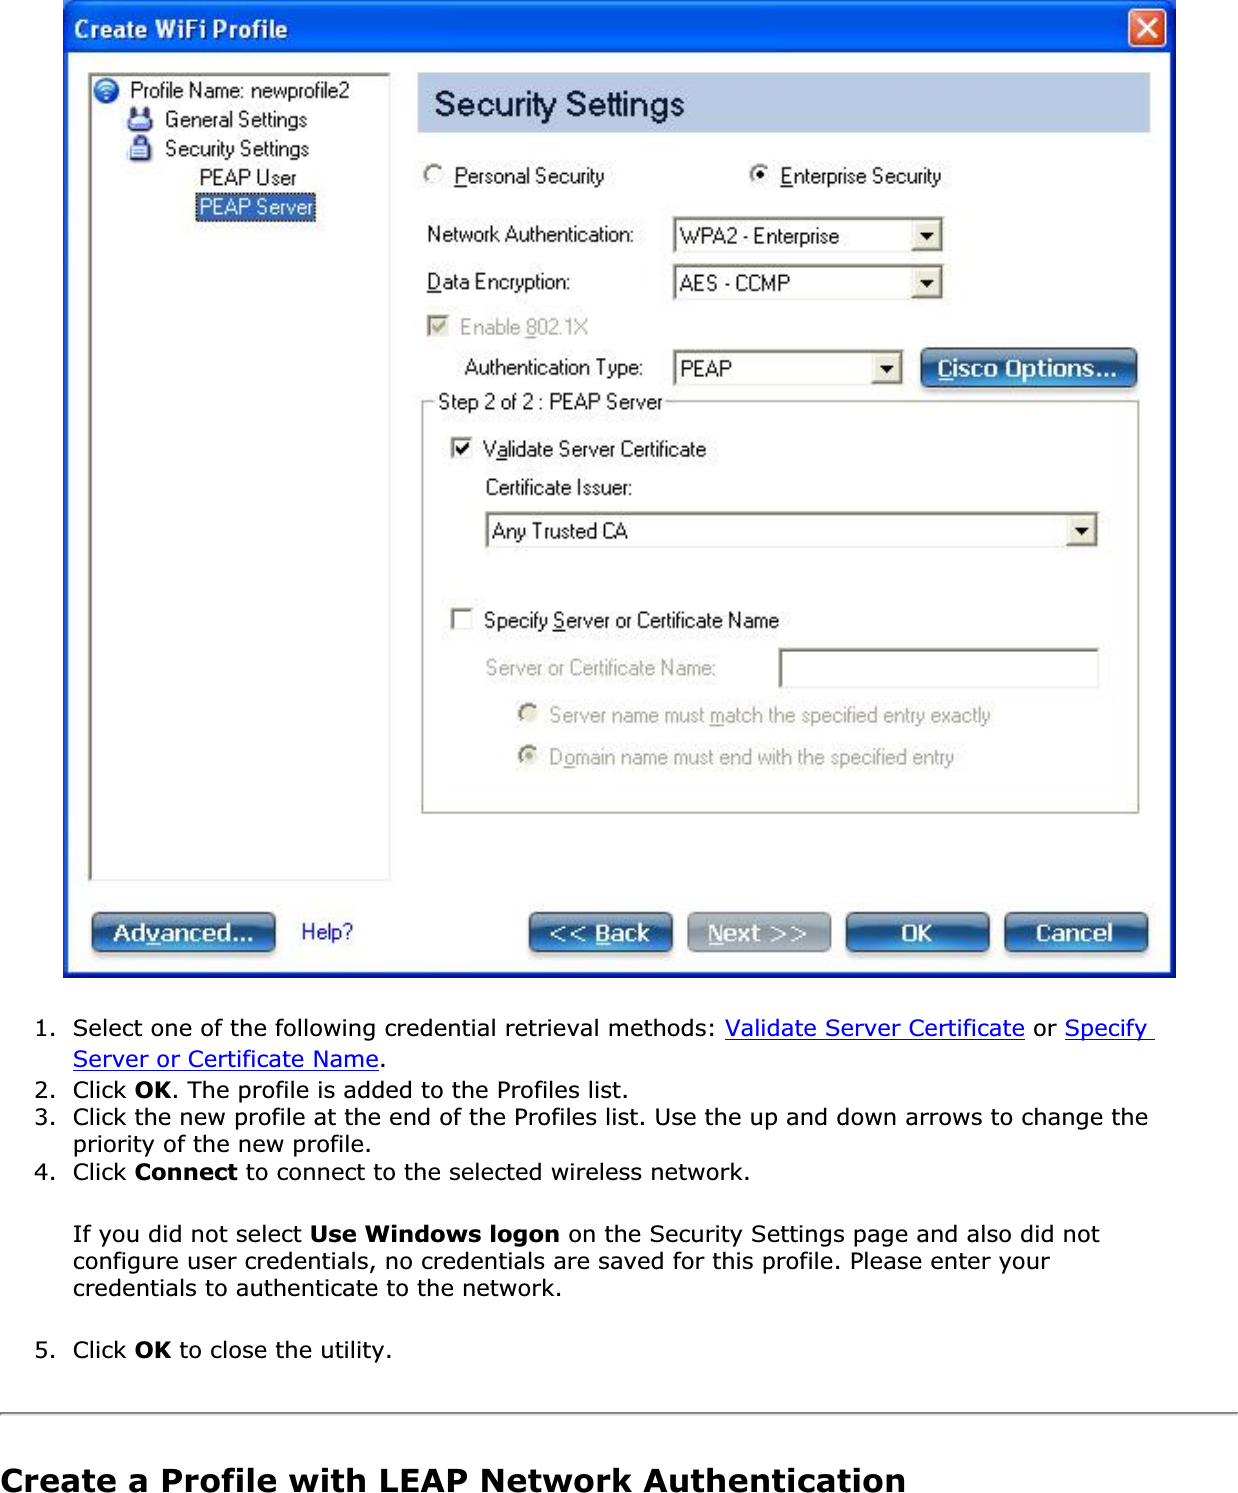 1. Select one of the following credential retrieval methods: Validate Server Certificate or SpecifyServer or Certificate Name.2. Click OK. The profile is added to the Profiles list.3. Click the new profile at the end of the Profiles list. Use the up and down arrows to change the priority of the new profile.4. Click Connect to connect to the selected wireless network.If you did not select Use Windows logon on the Security Settings page and also did not configure user credentials, no credentials are saved for this profile. Please enter your credentials to authenticate to the network. 5. Click OK to close the utility.Create a Profile with LEAP Network Authentication